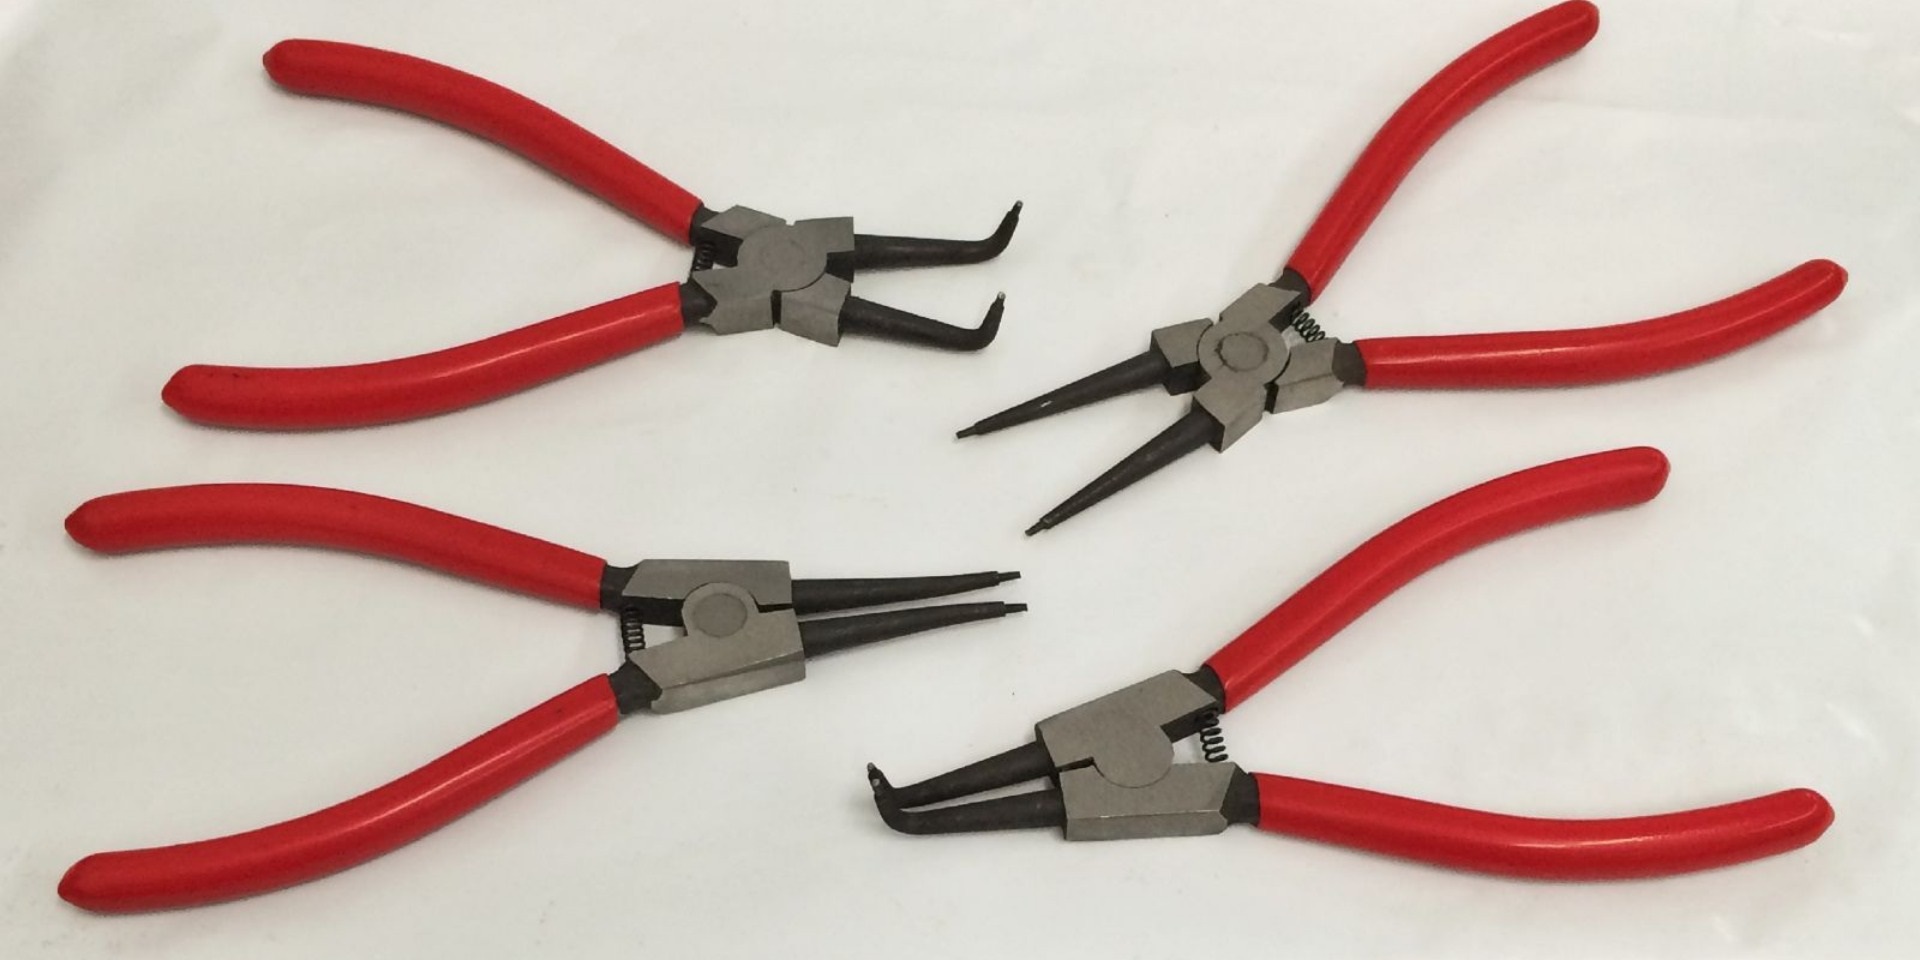 What are snap ring pliers used for?